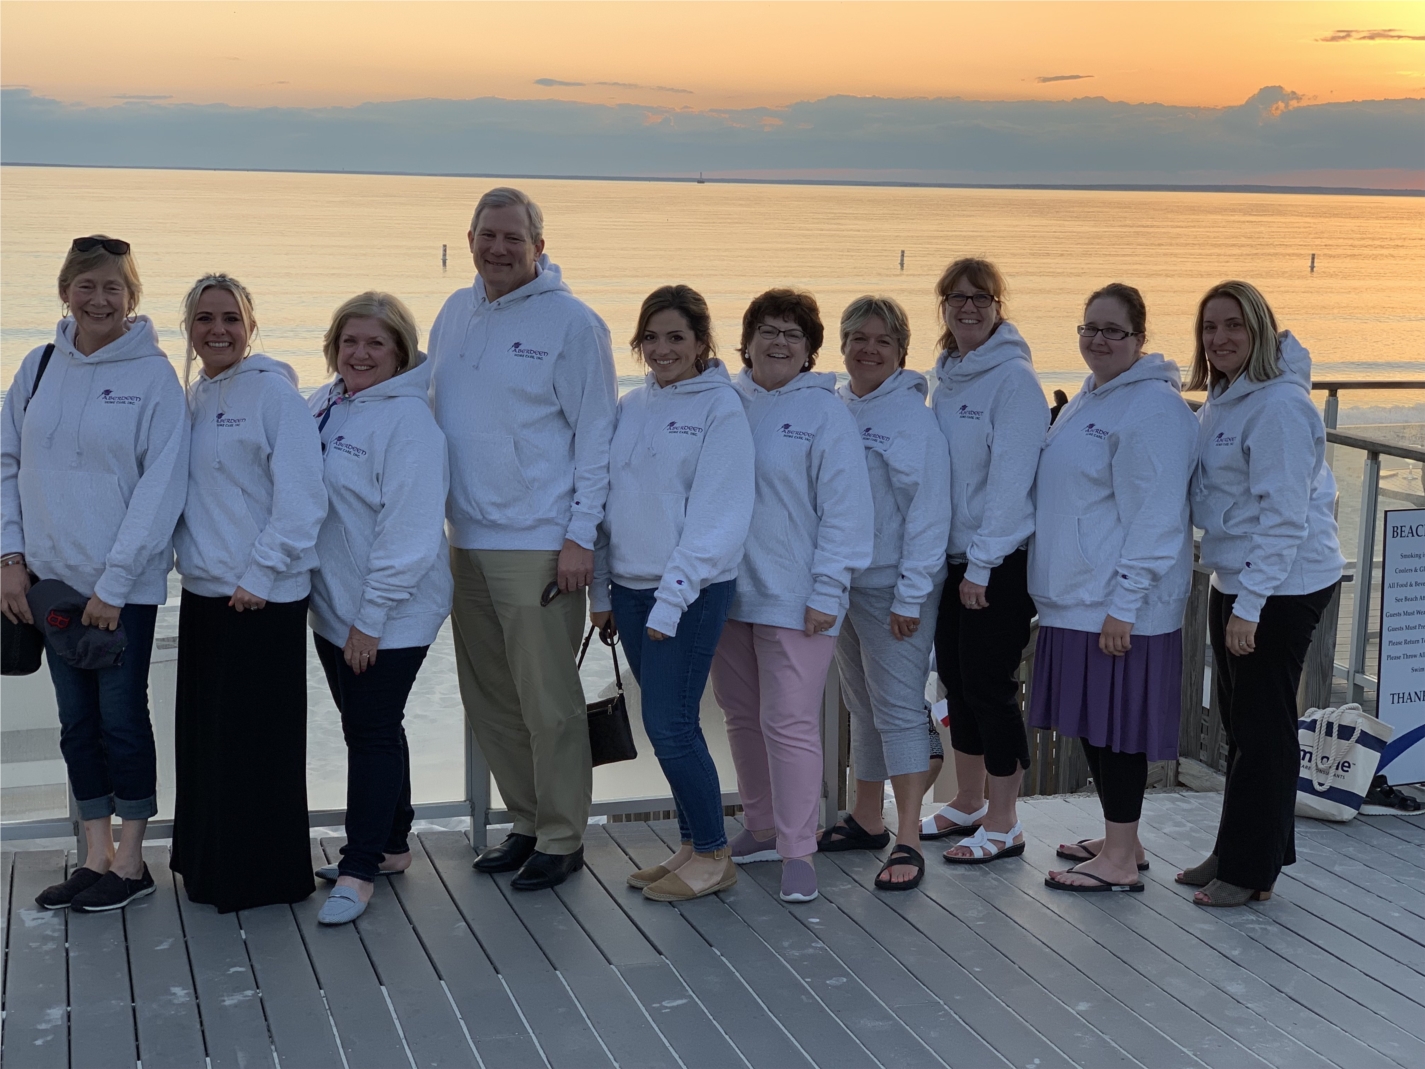 Team Aberdeen attending the New England Home Care and Hospice Conference in Falmouth, MA this summer, where Aberdeen President Joanne MacInnis RN was a presenter!